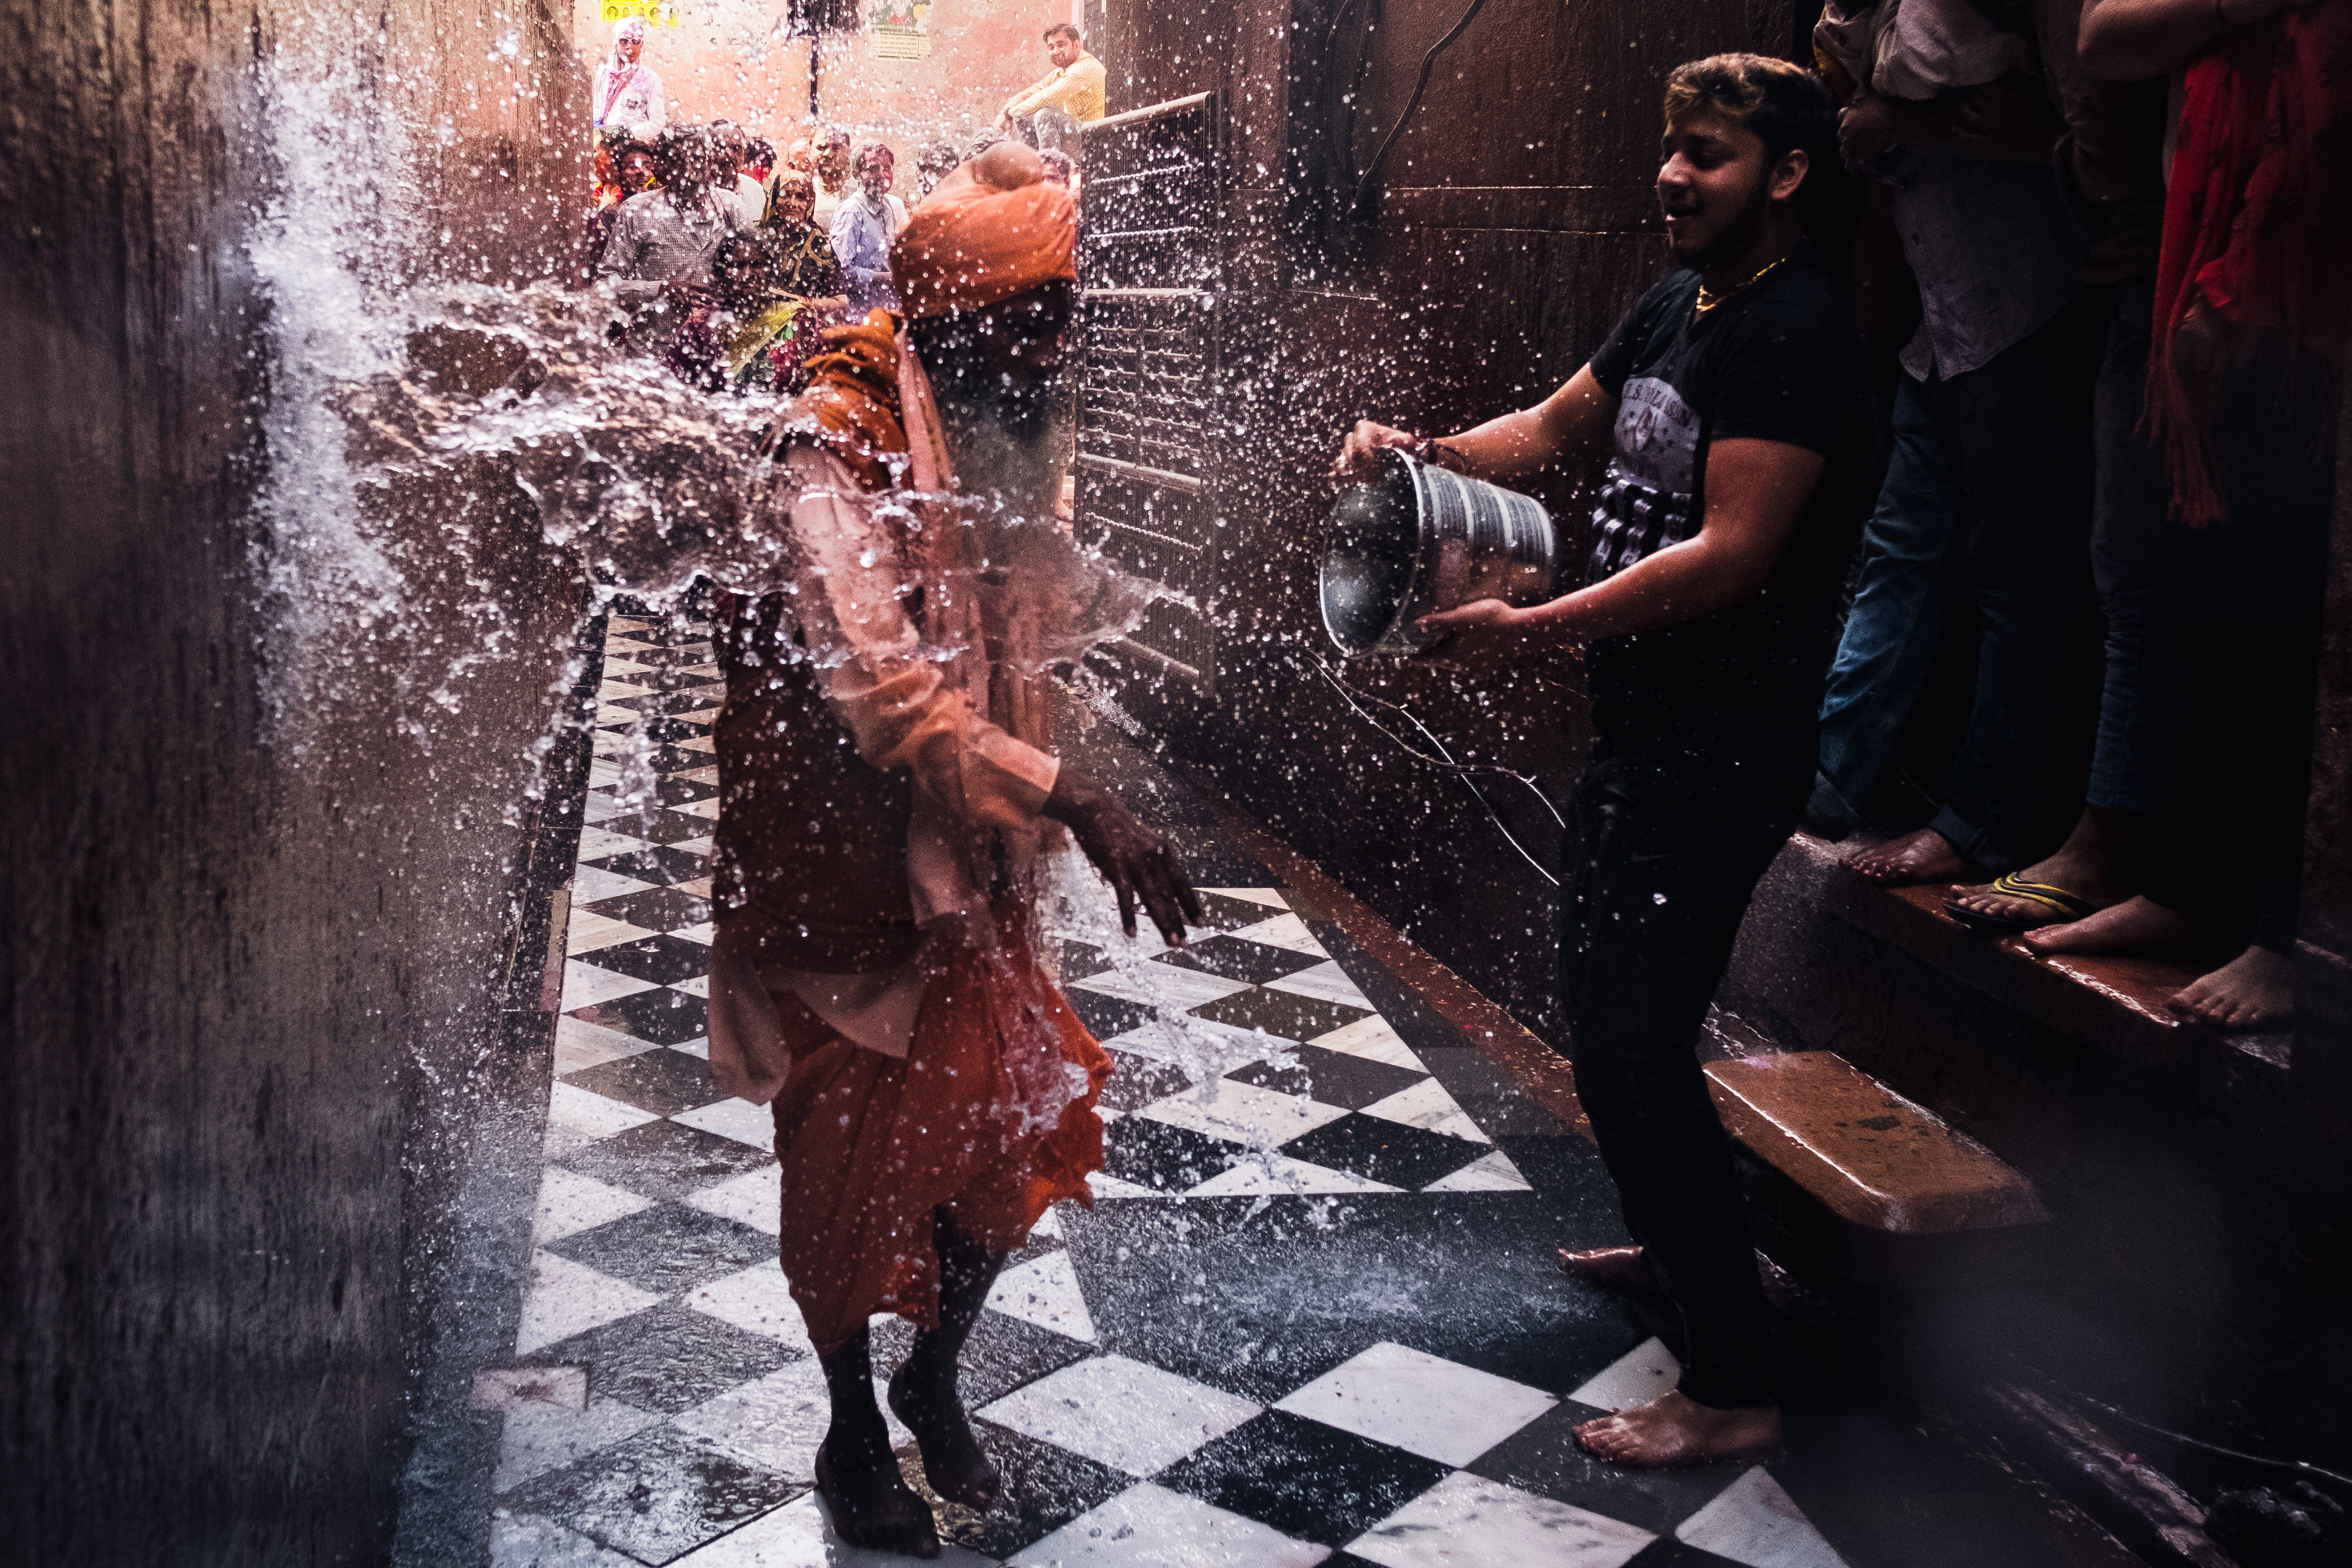 India Street Photography During Holi Festival. Priest gets drenched in water. Images by Jason Vinson